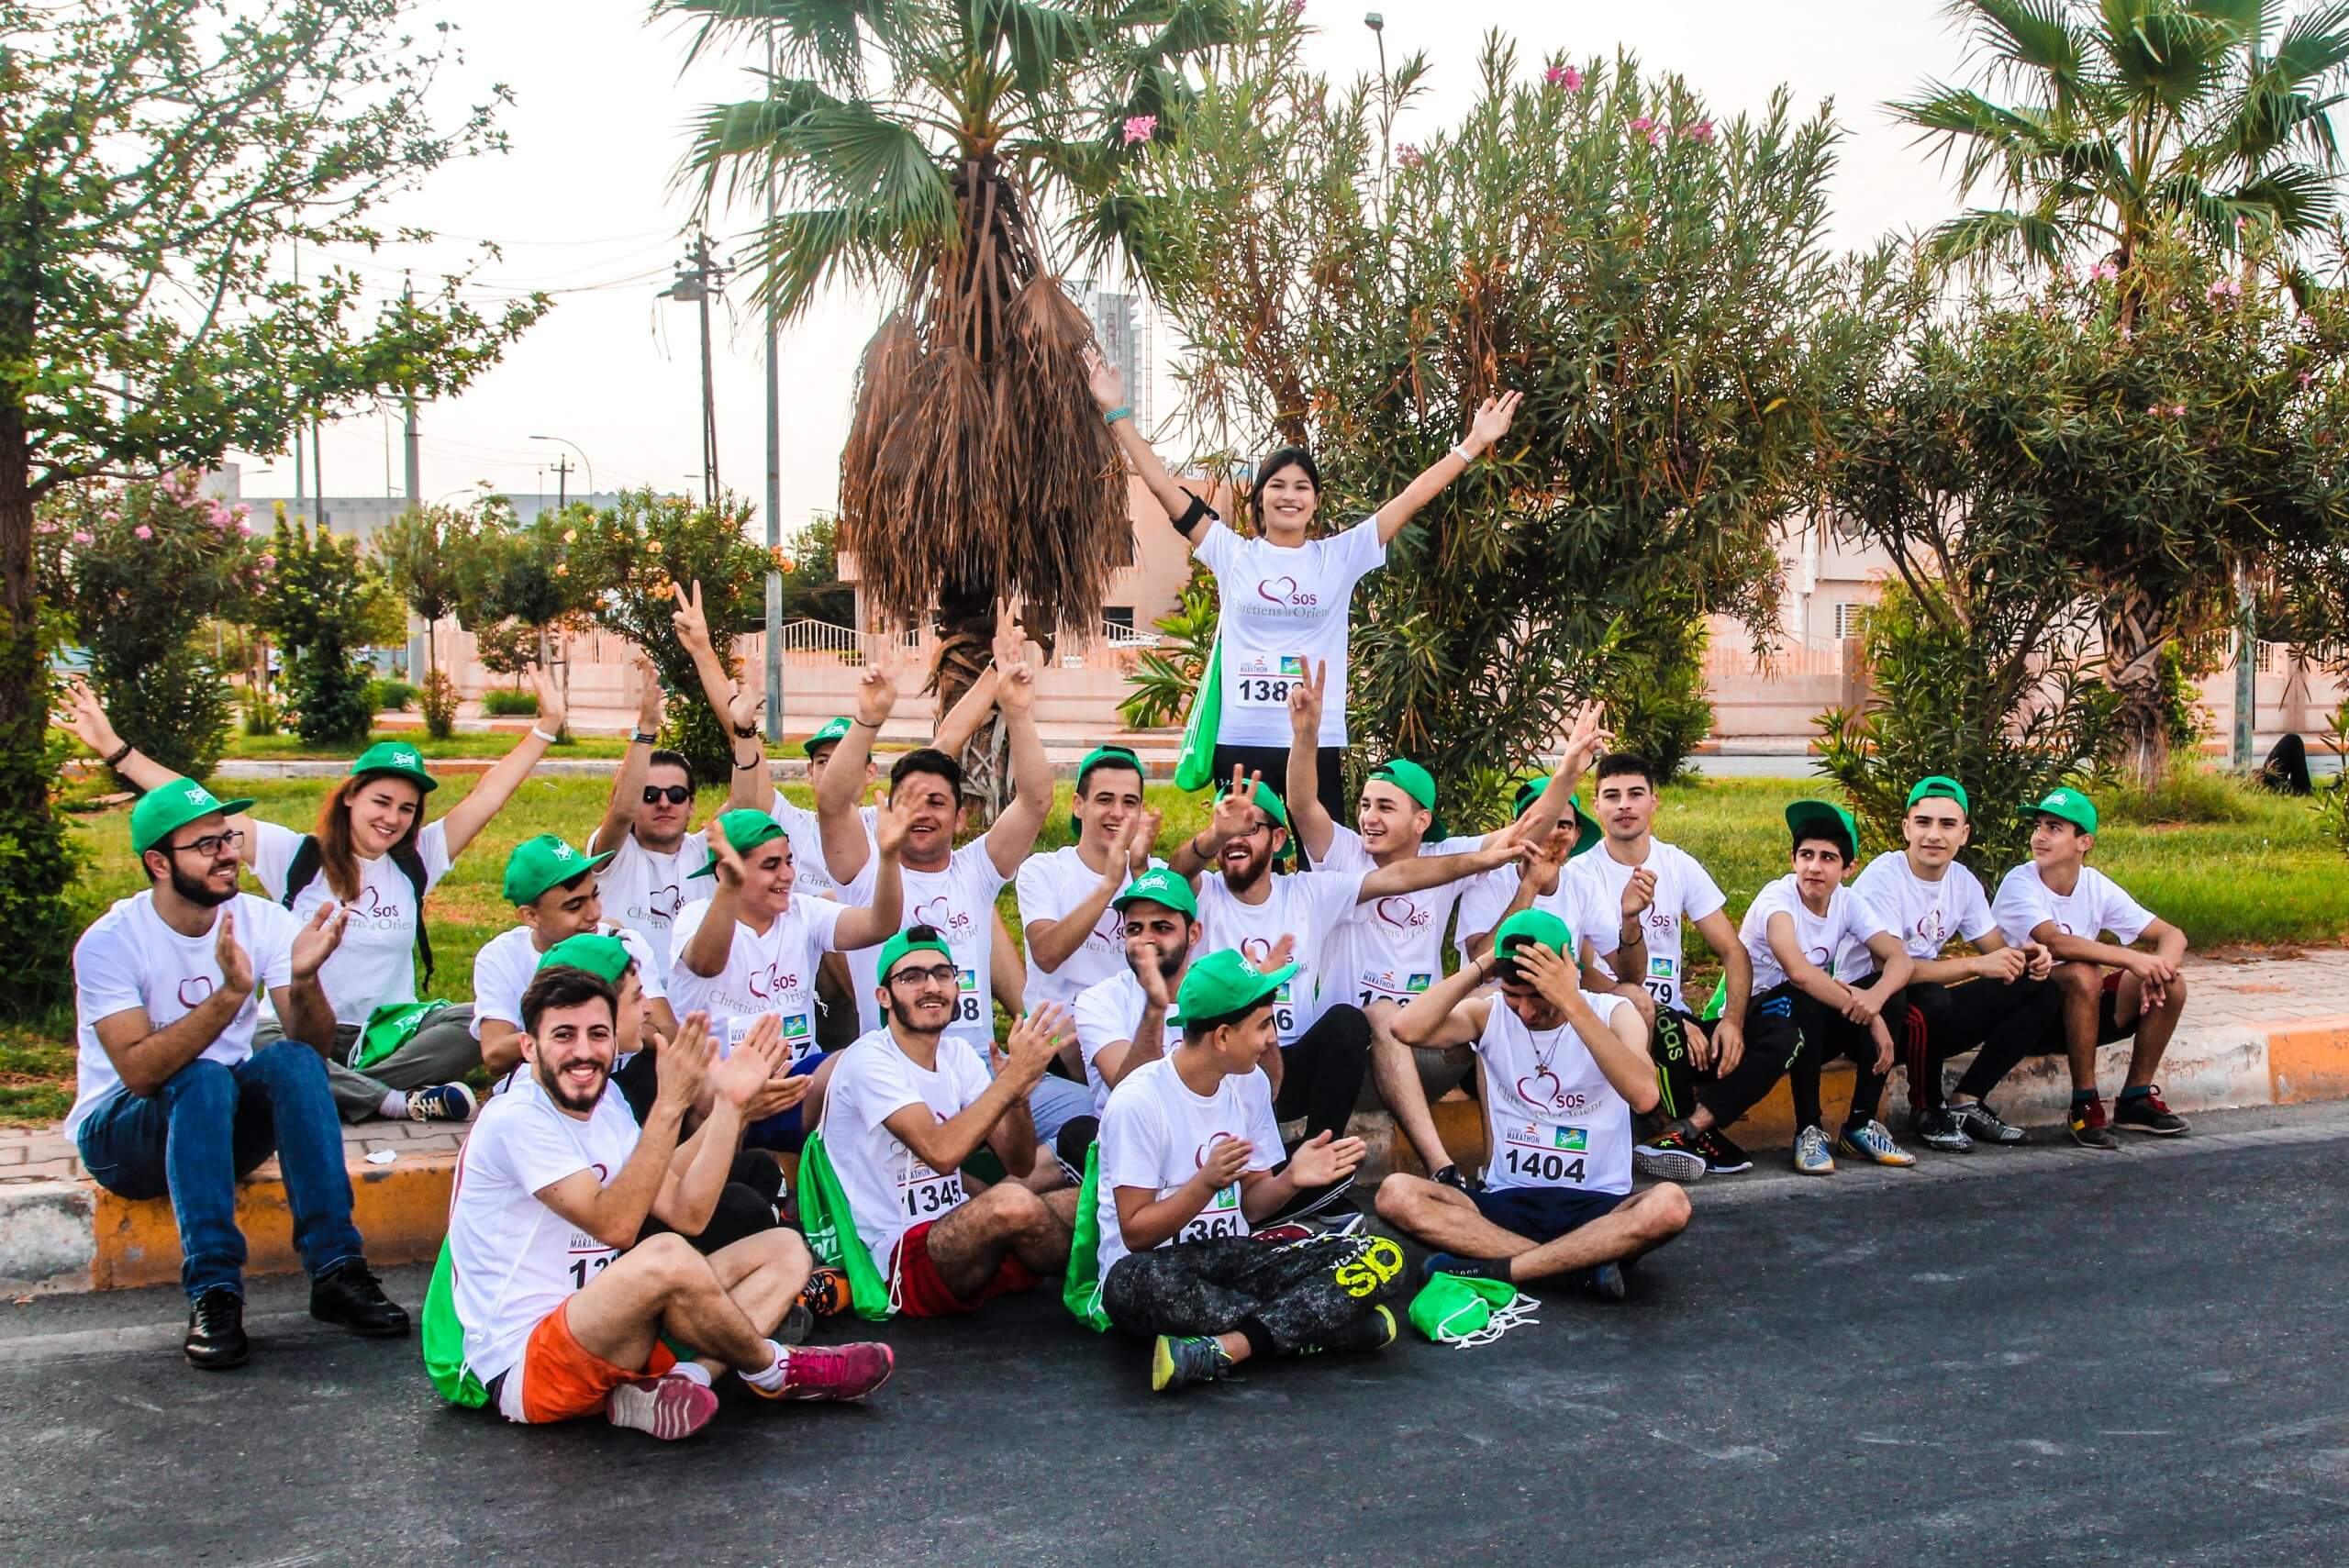 200 Iraqi Christians participate in the Erbil Marathon to celebrate the end of the fighting